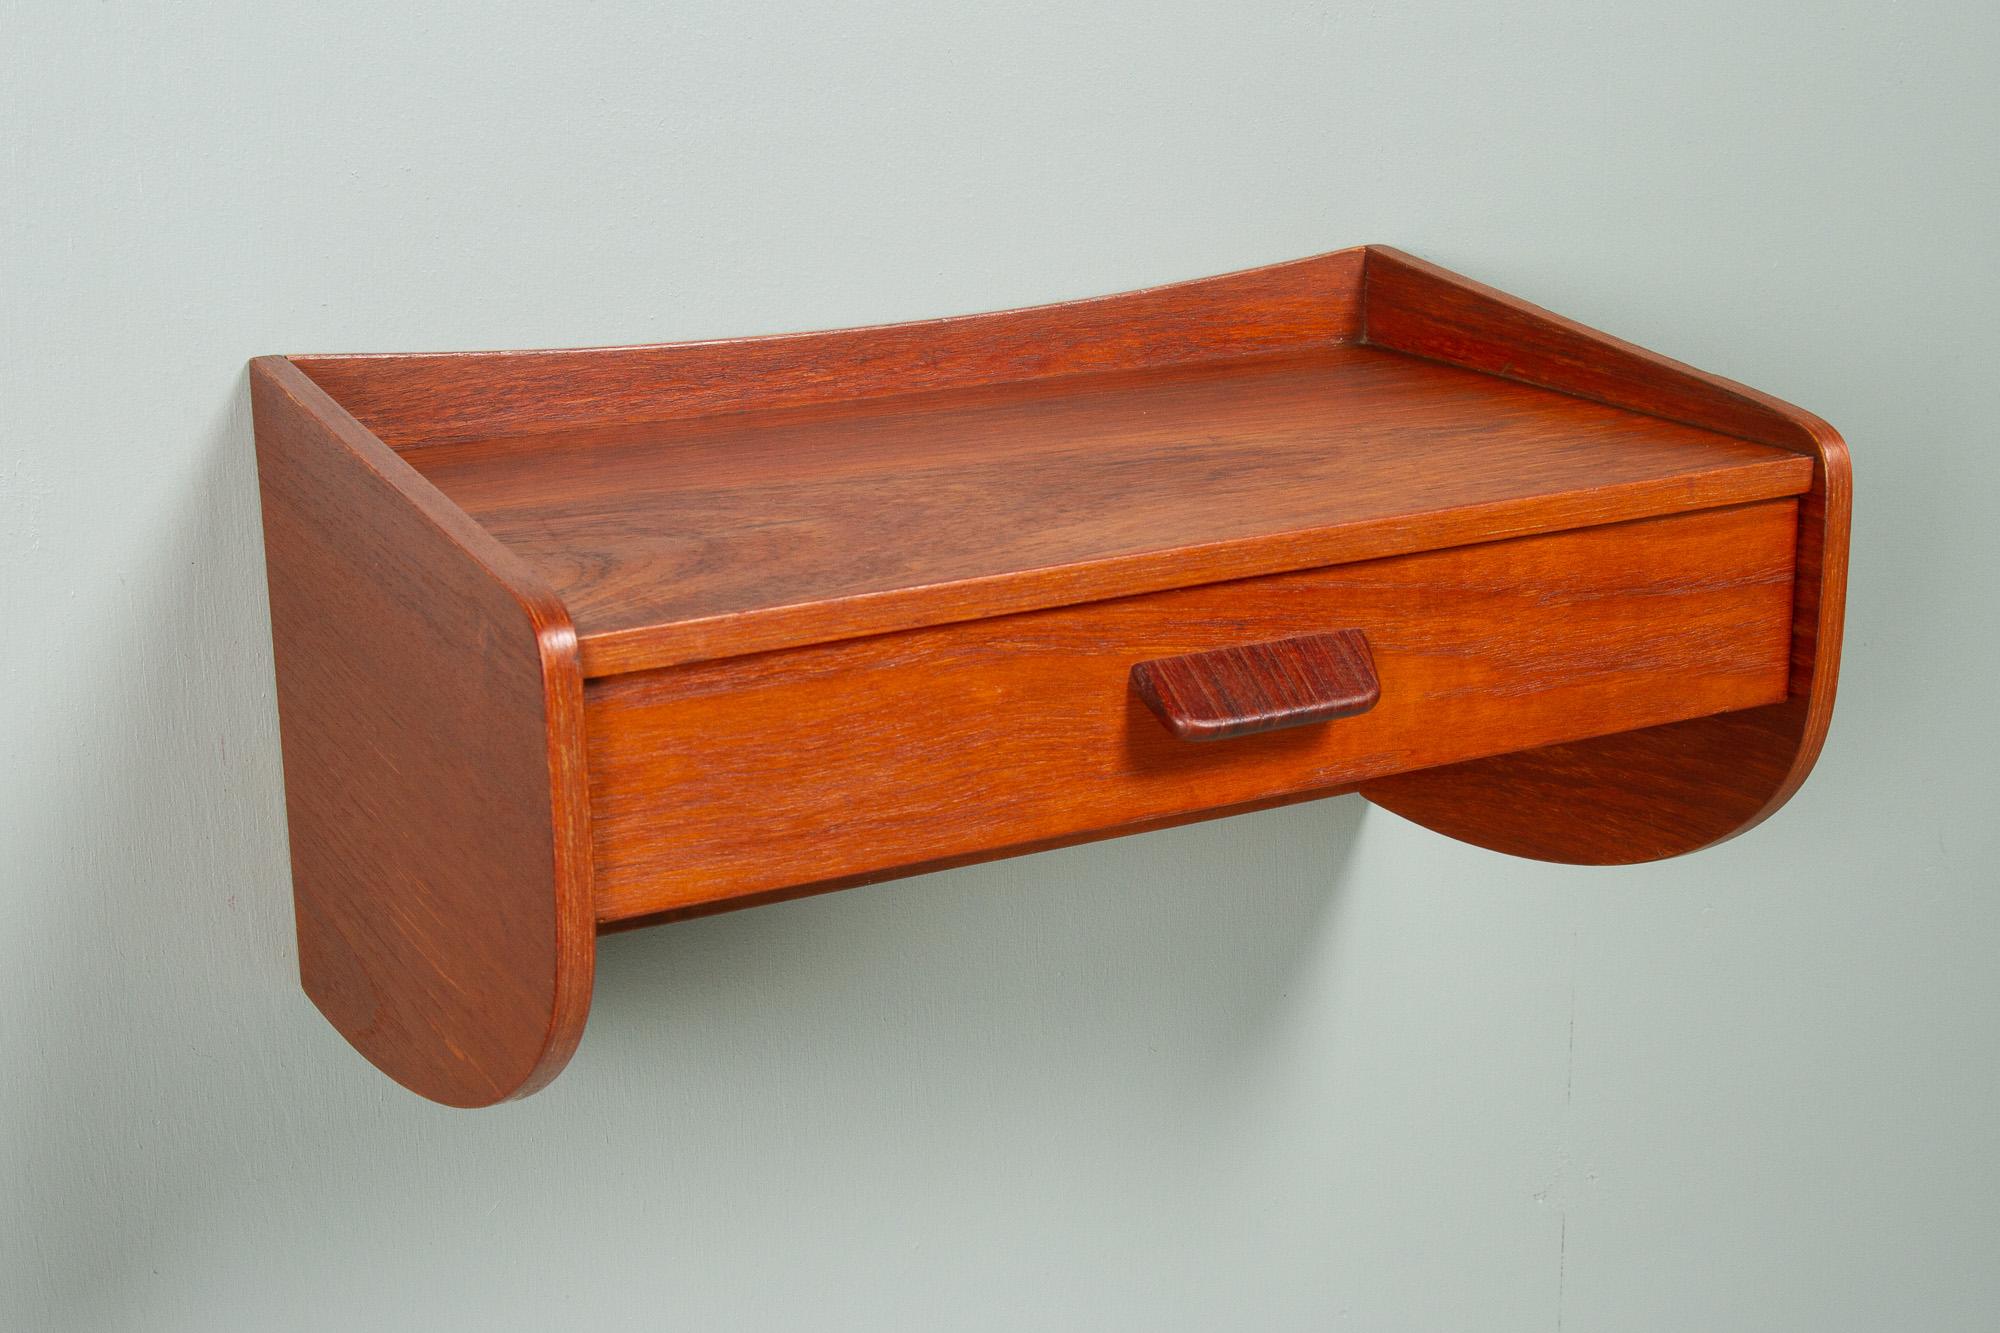 Vintage Danish Teak Floating Shelf, 1960s.
Mid-century modern wall mounted bedside table/nightstand/wall console made in Denmark in the 1960s. Featuring a single drawer with pull in solid teak.
Beautiful and expressive teak pattern. Organic